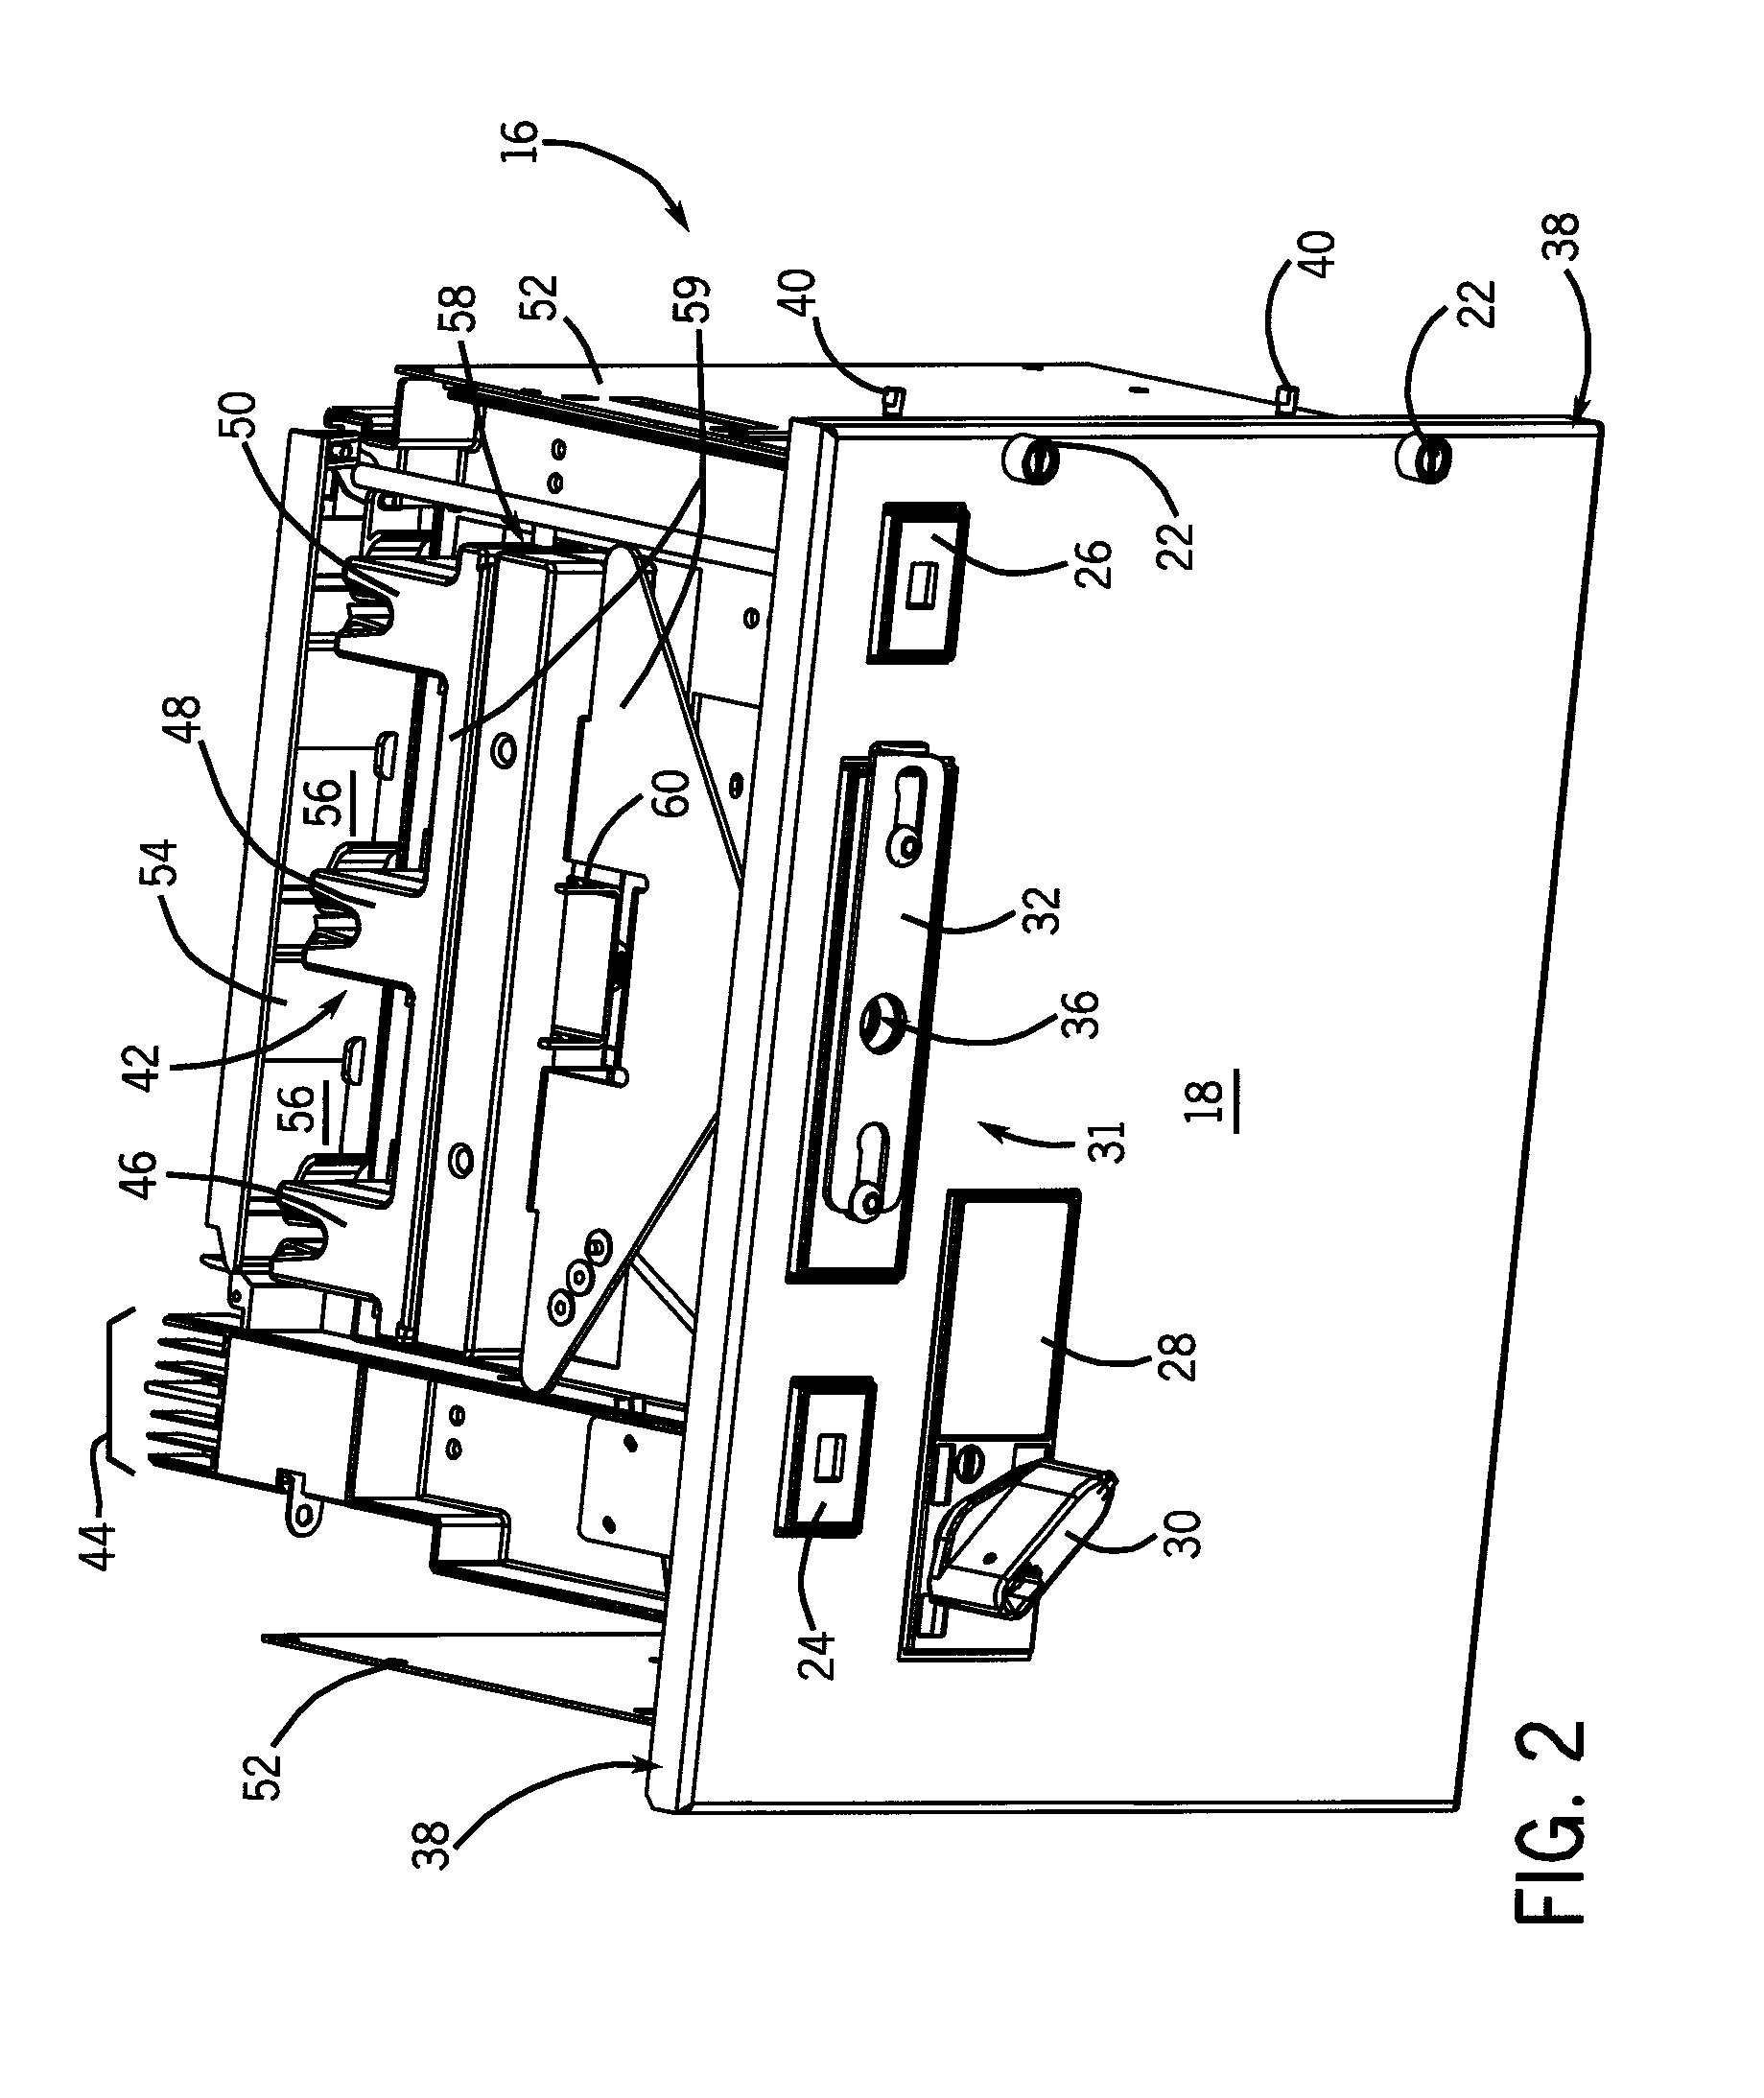 Free-wheeling clutch for a motor control center subunit having moveable line contacts